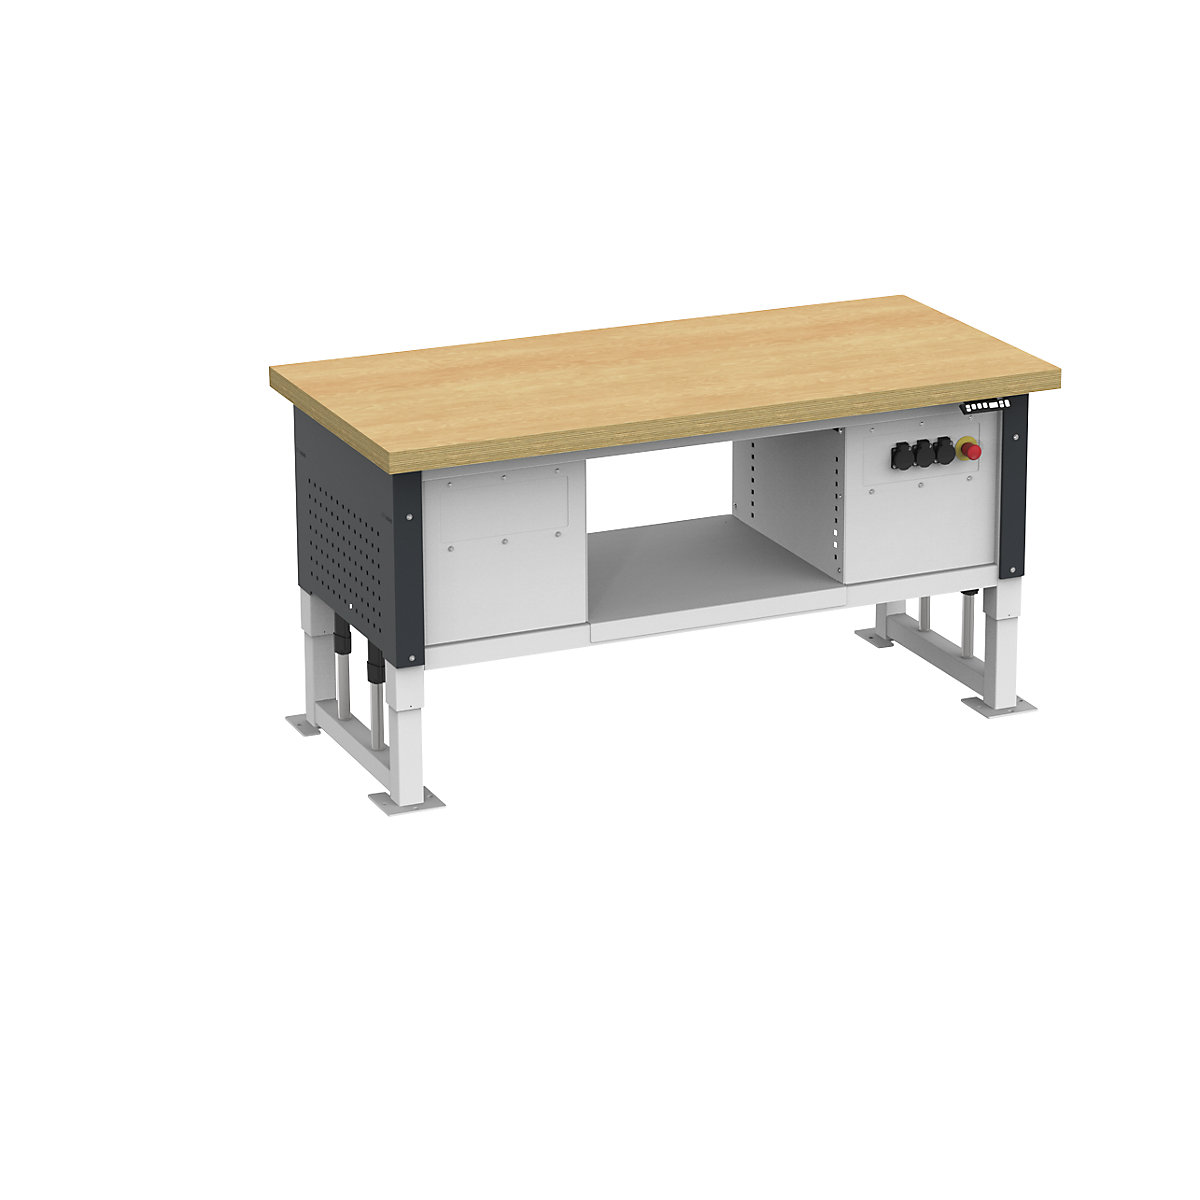 Heavy duty table, electrically height adjustable, worktop width 1685 mm, max. surface load 2000 kg, charcoal RAL 7016-2